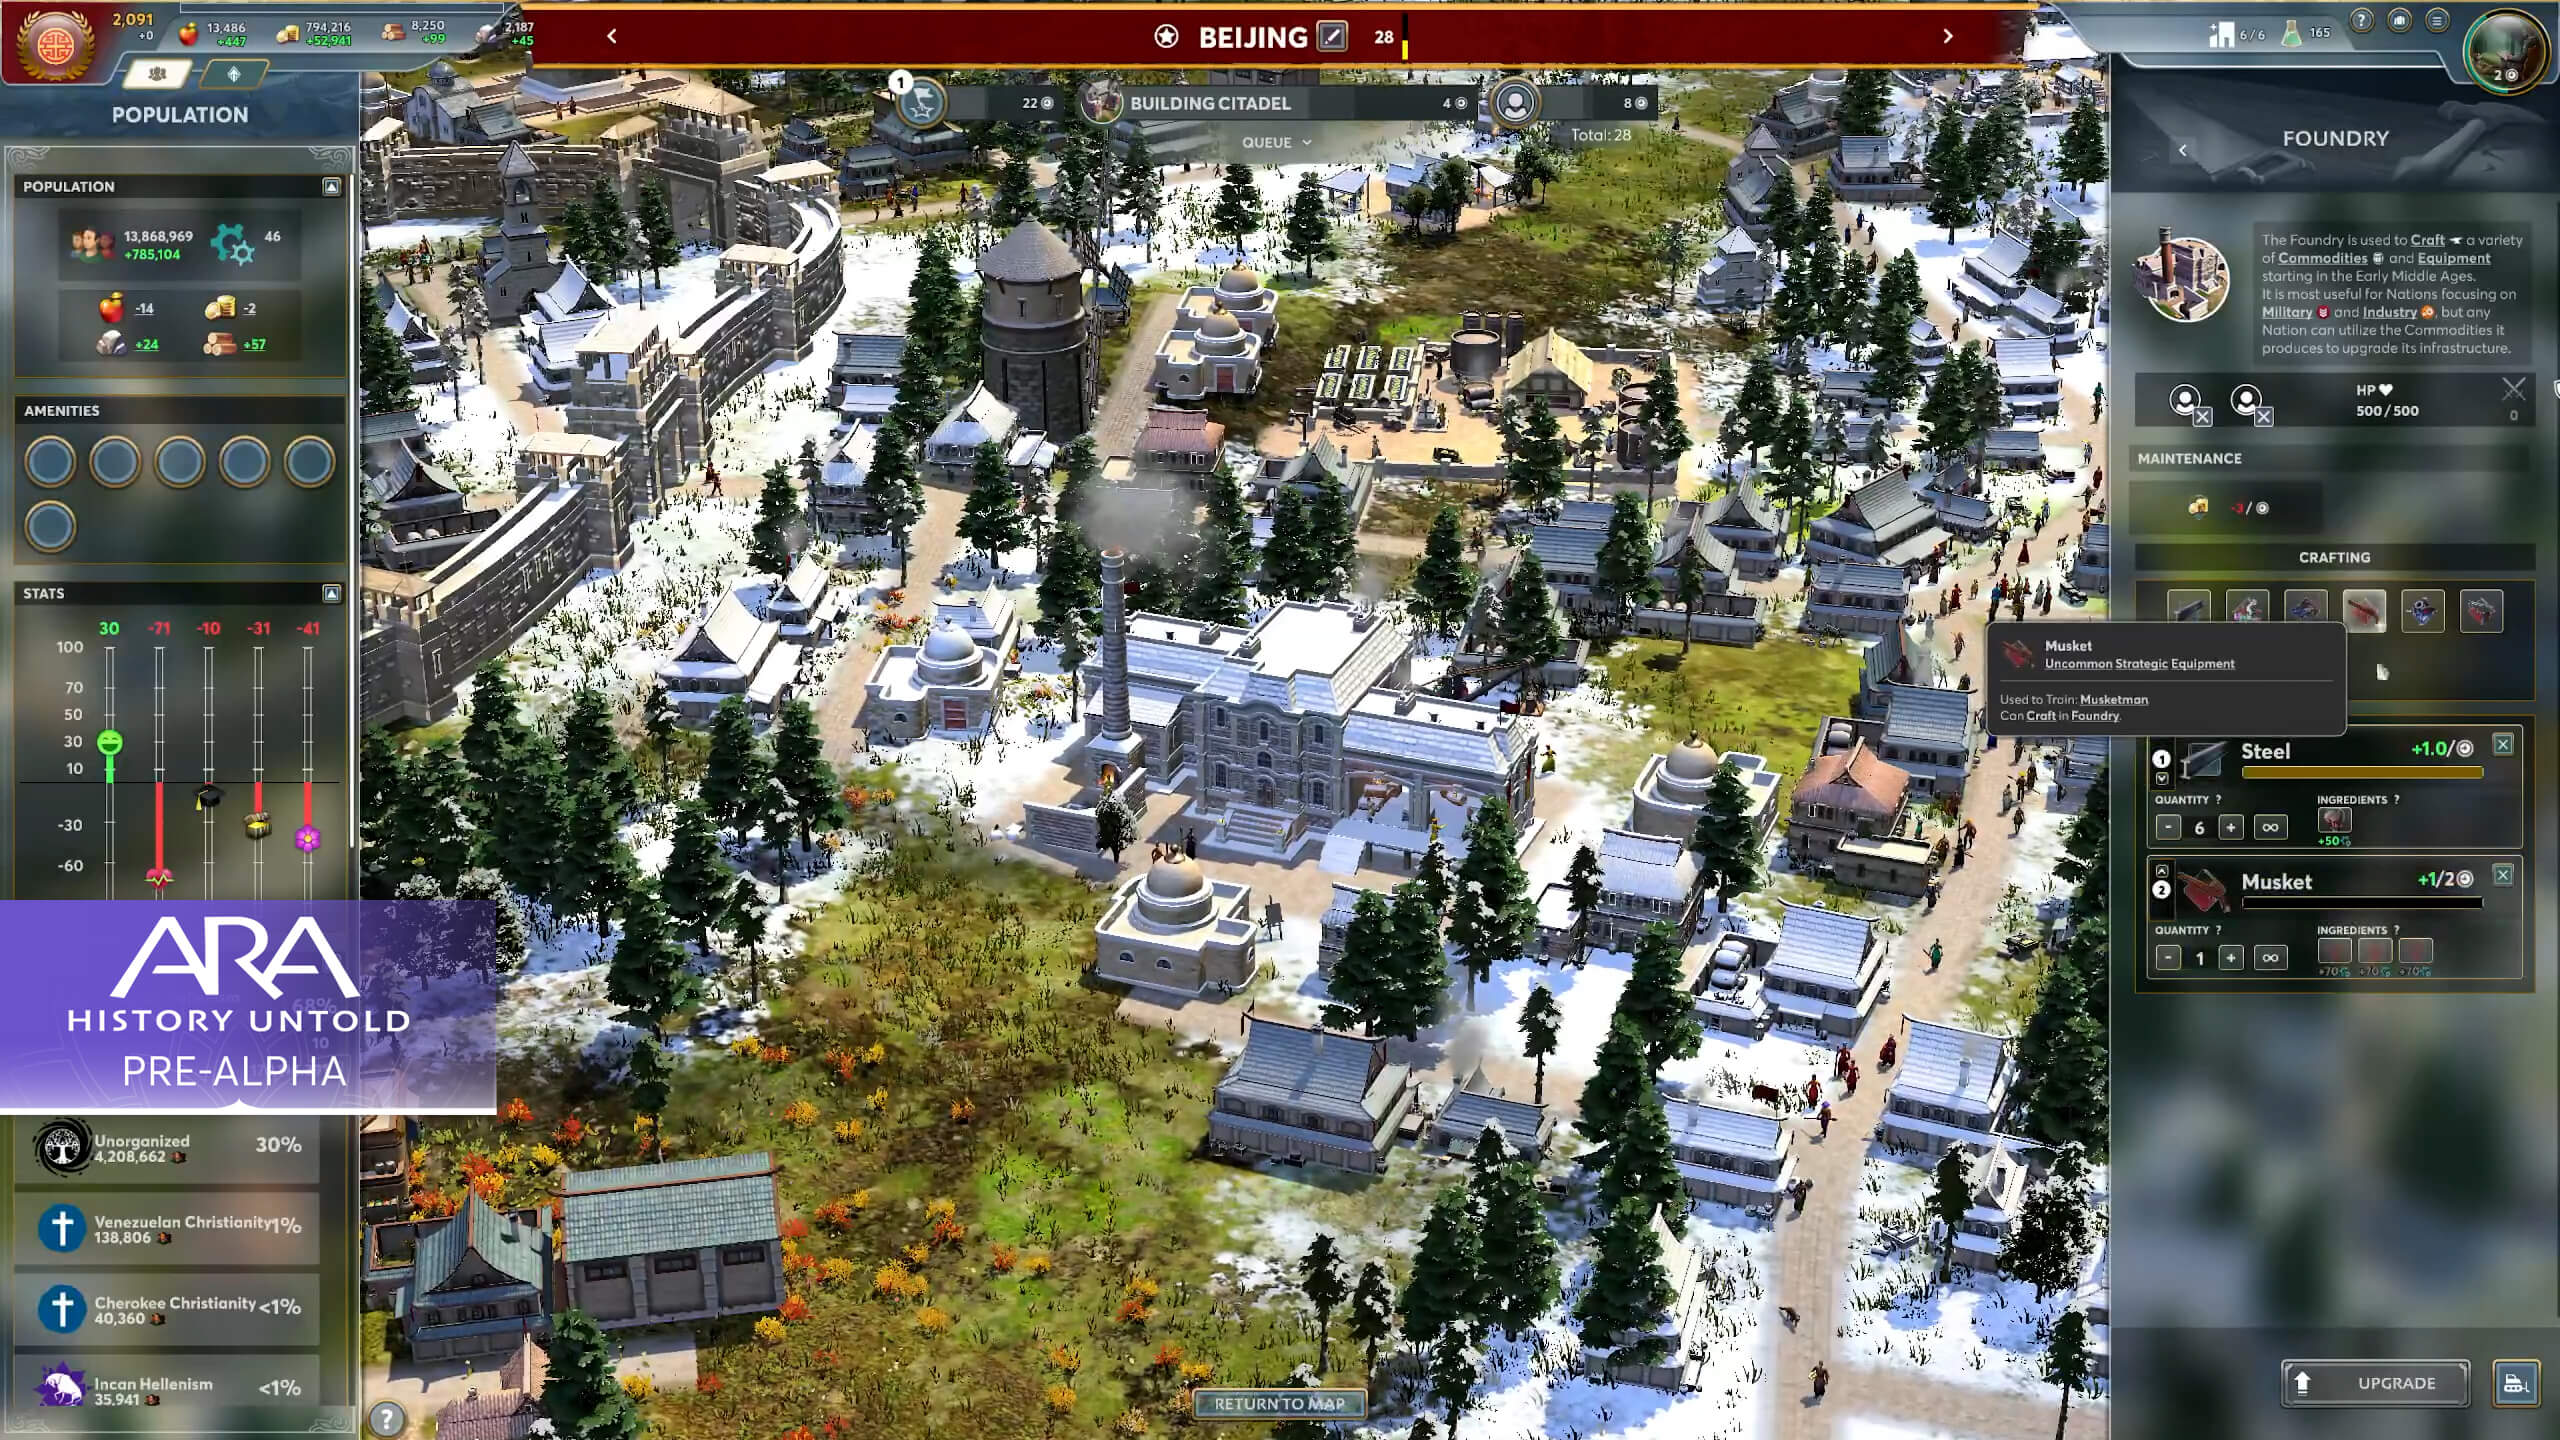 An image of the city builder screen in Ara: History Untold.